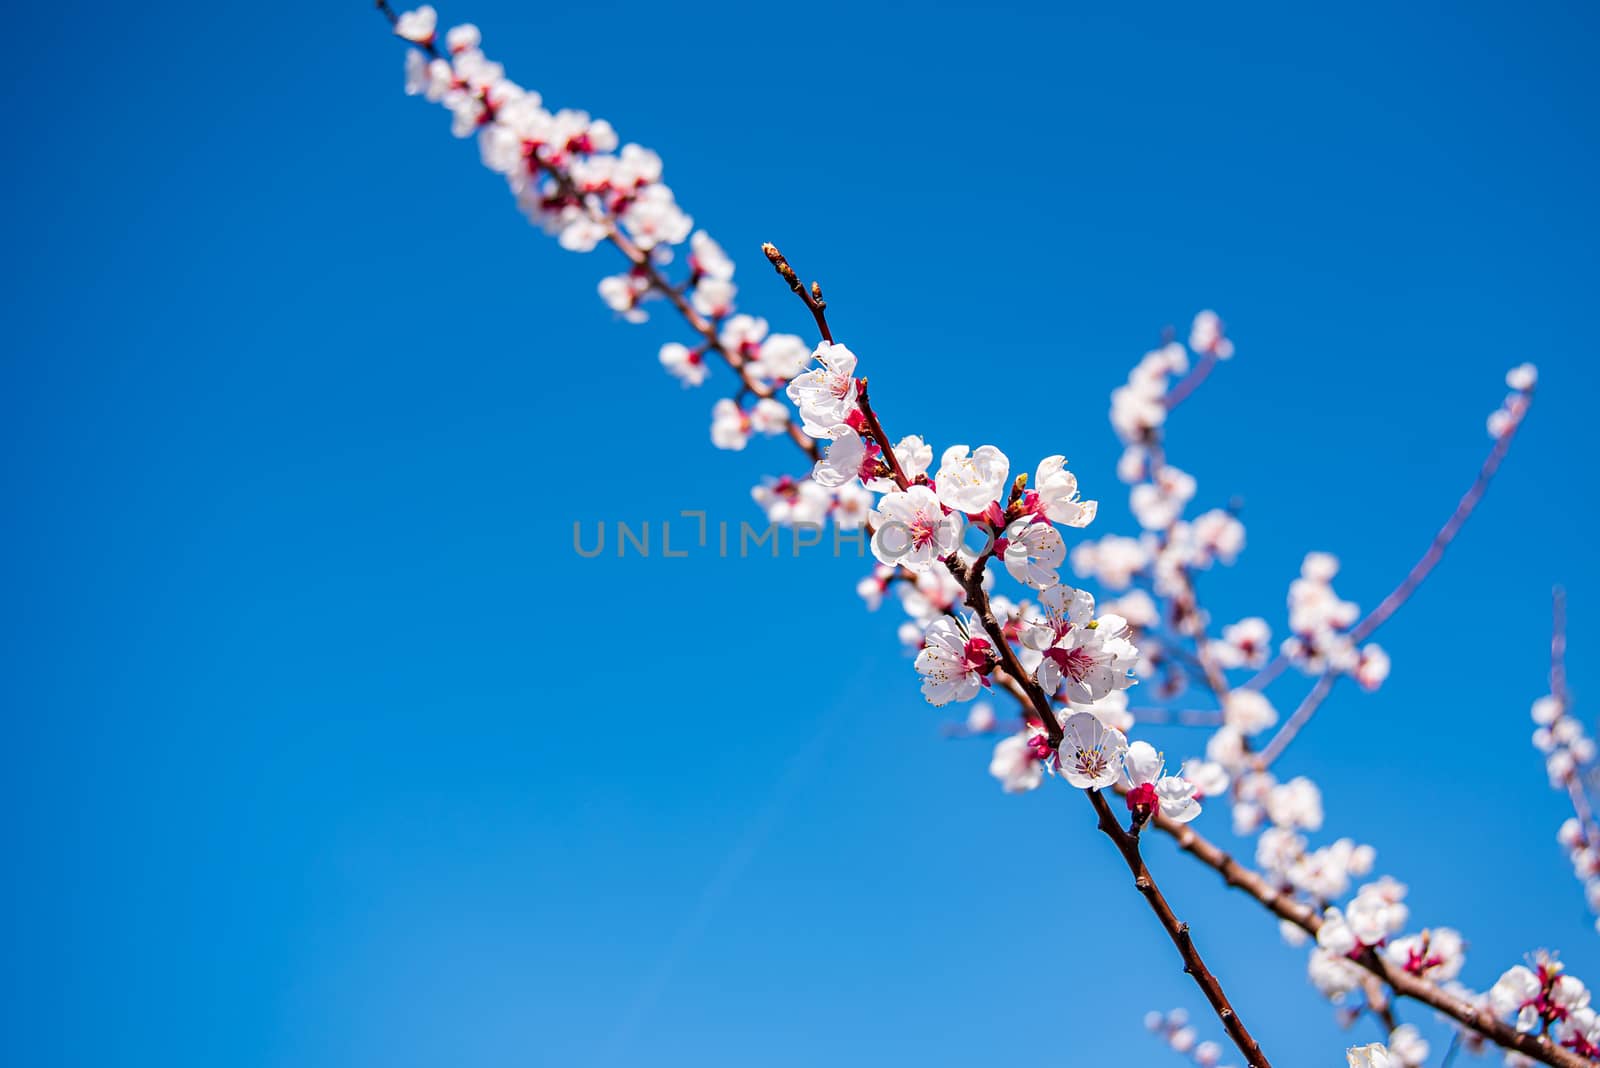 Detail view of a flowering apricot tree branch in front of a deep blue sky